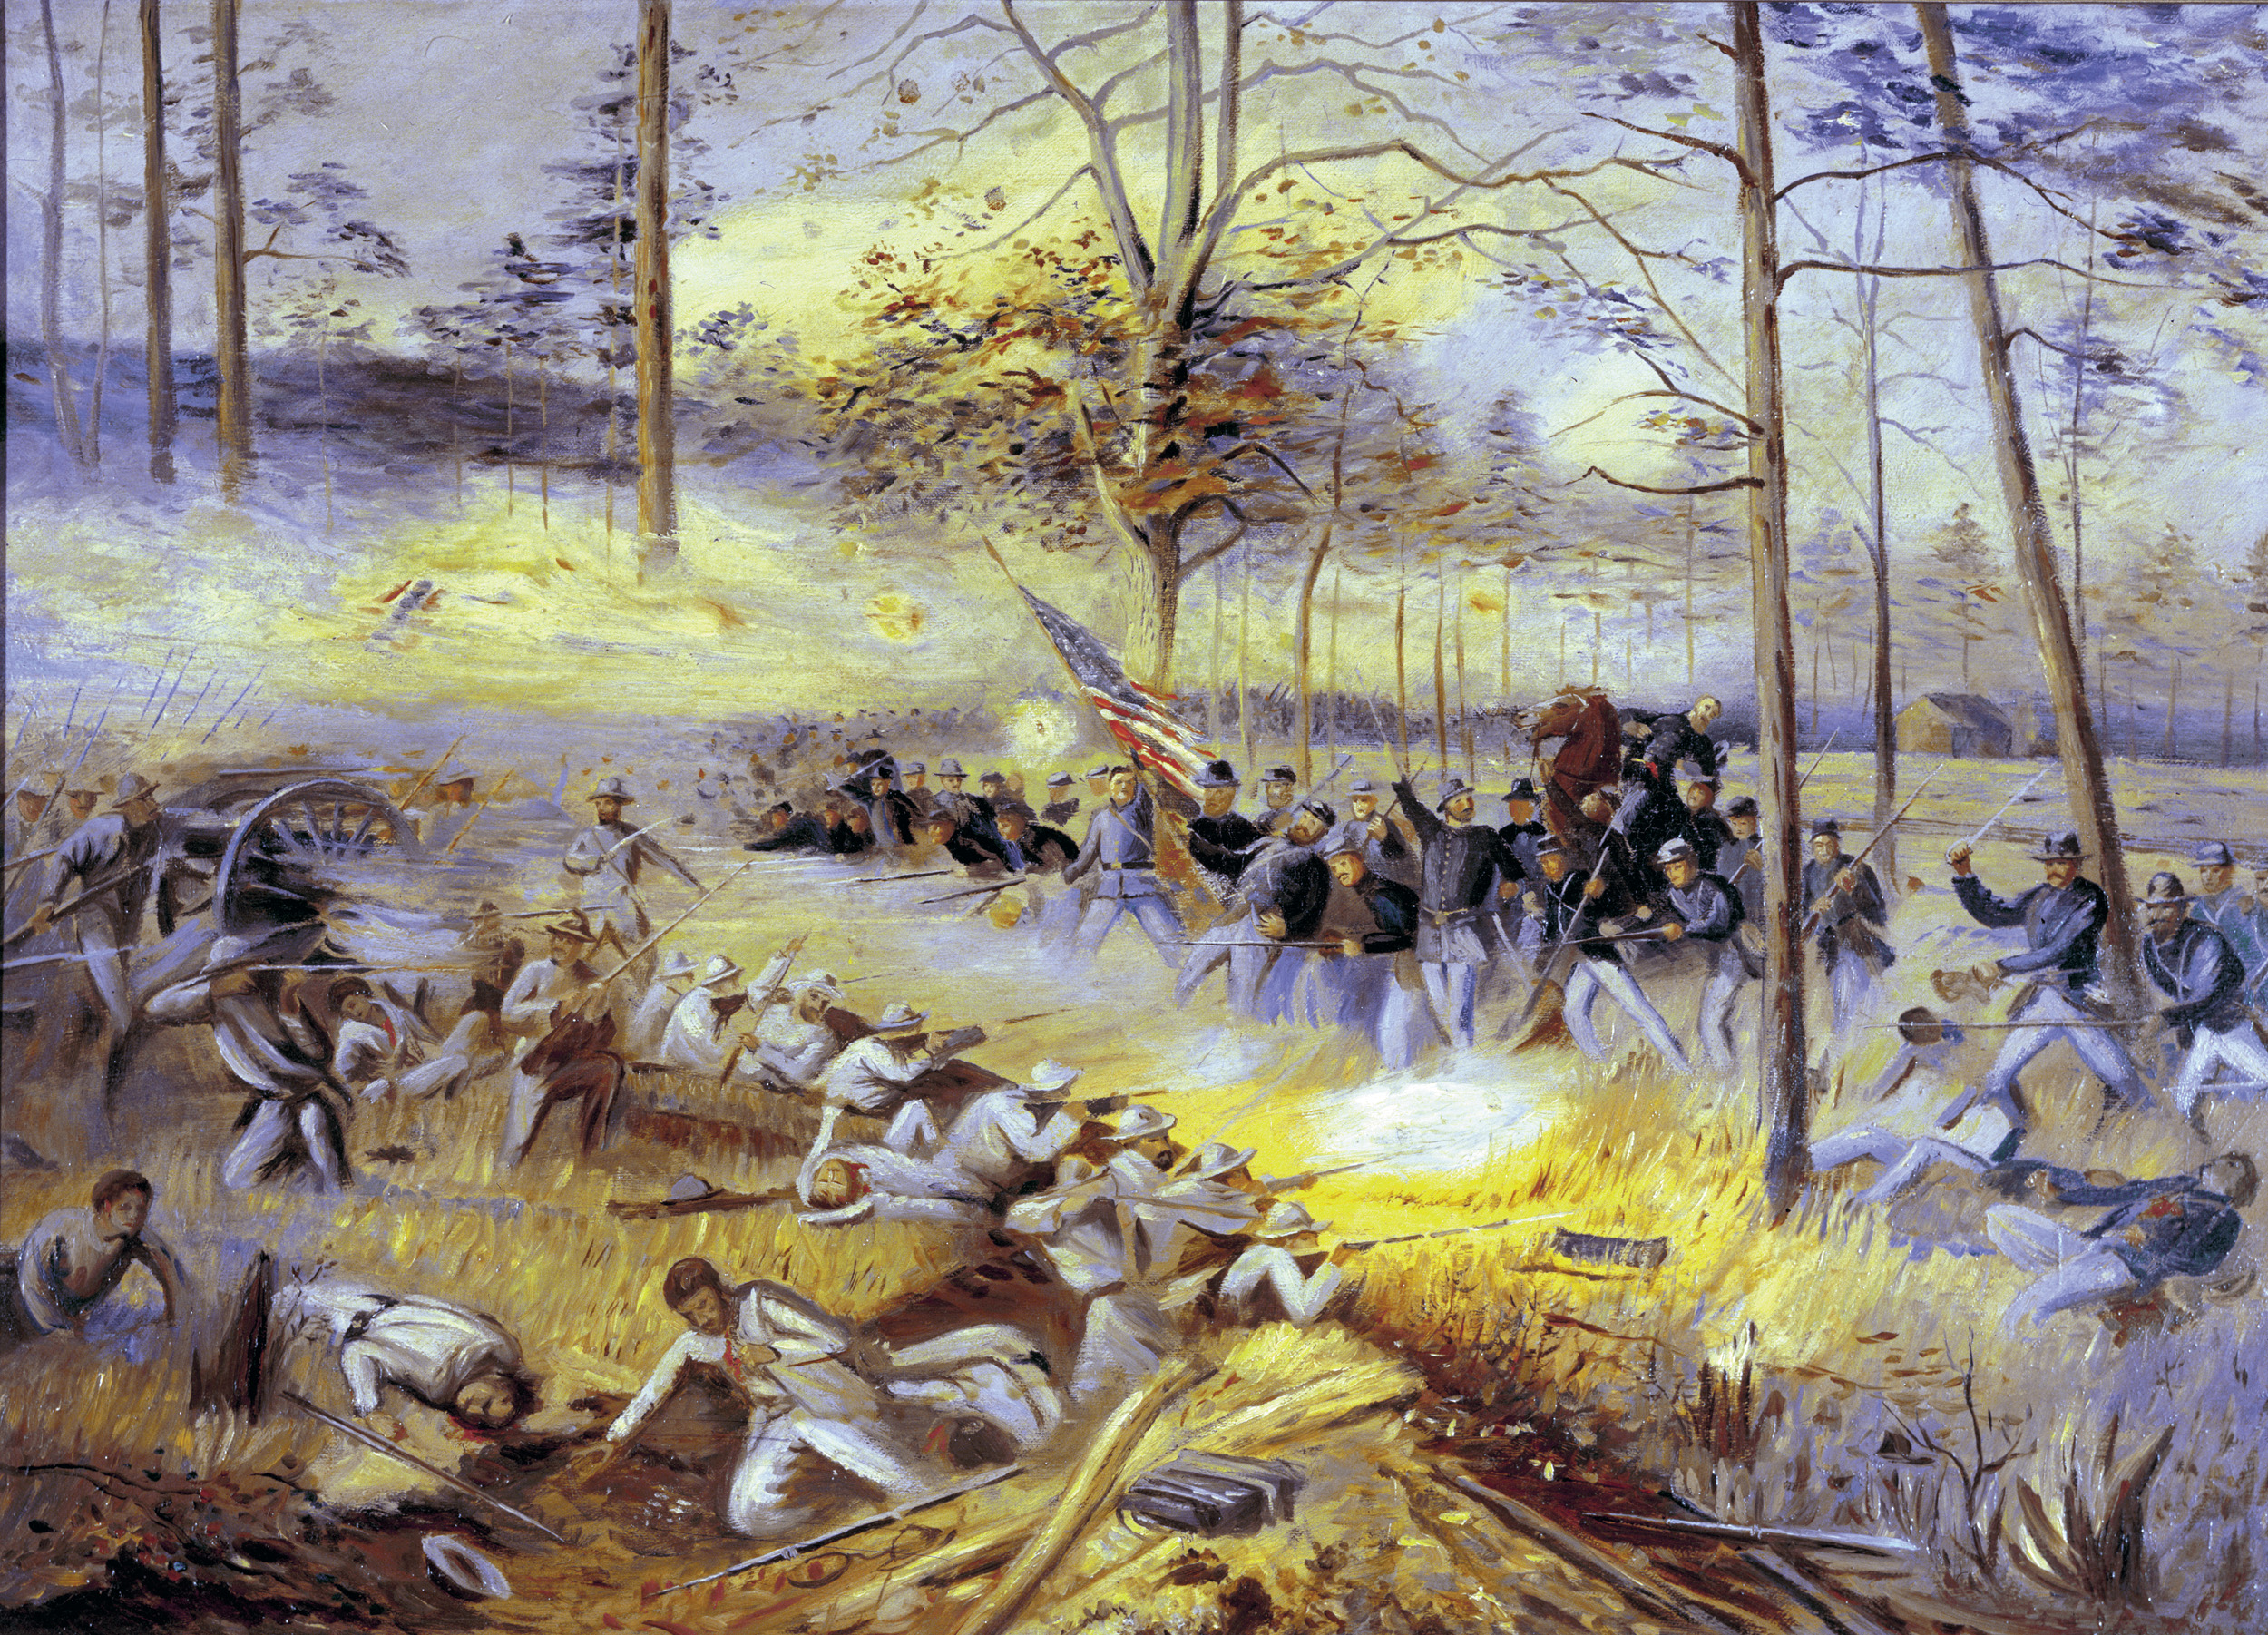 Determined to win back eastern Tennessee from the advancing Federals, Confederates hurled themselves at the Northerners in the forested and broken fields near Chickamauga Creek in northwestern Georgia.